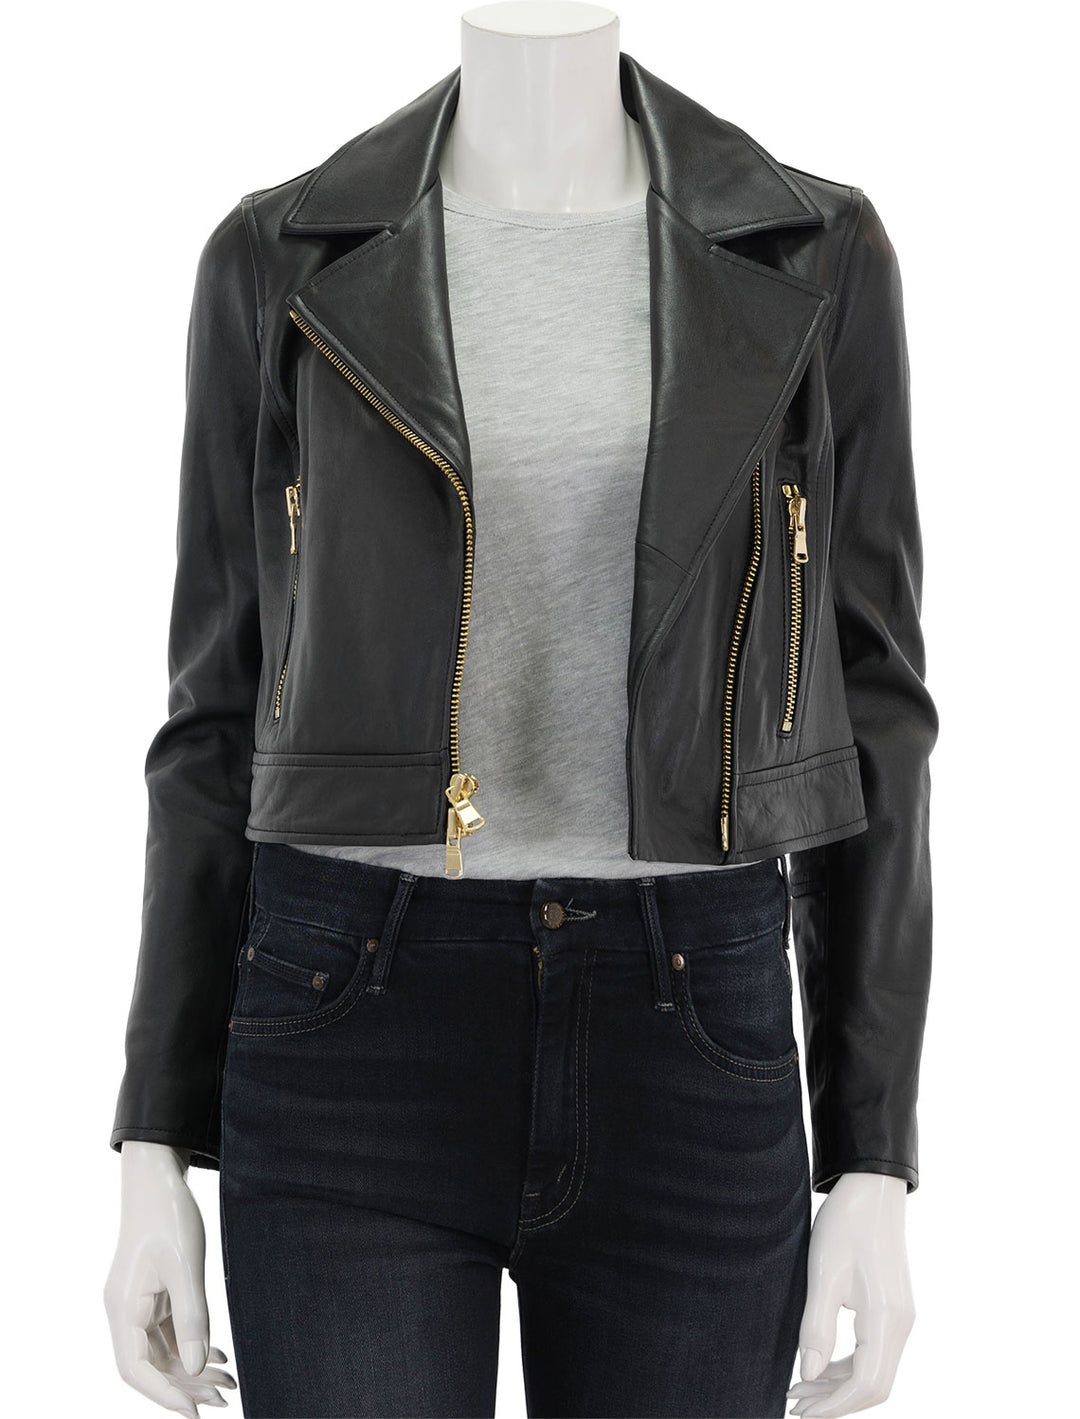 Front view of L'agence's onna cropped biker jacket in black, unzipped.